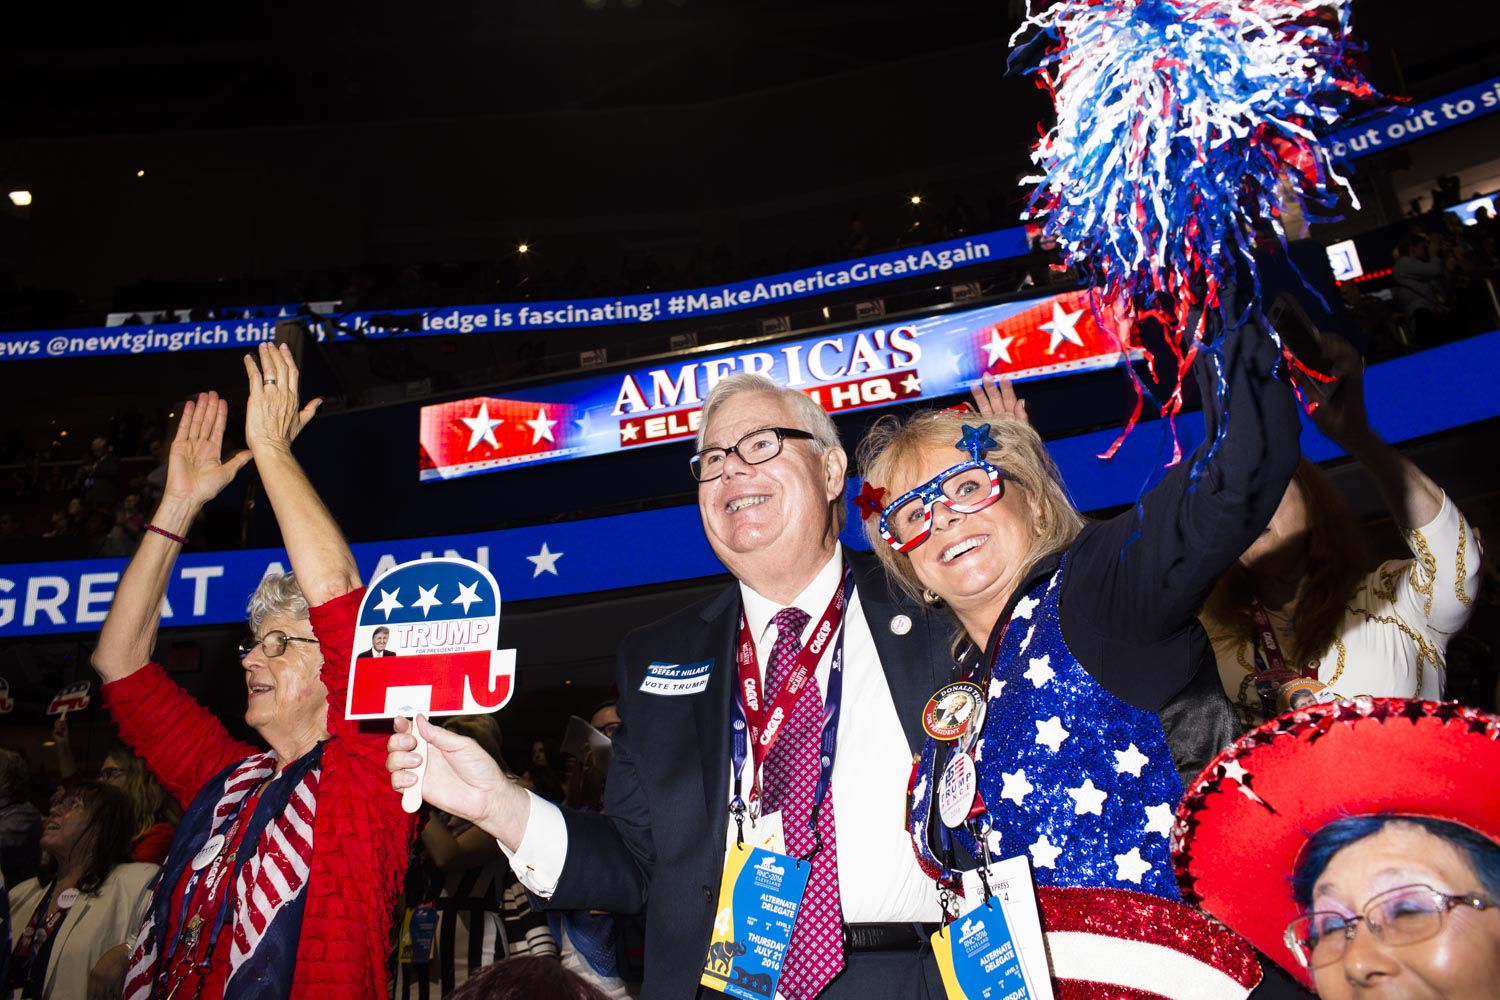 Scenes from the floor at the 2016 Republican National Convention in Cleveland on Thursday, July 21, 2016.